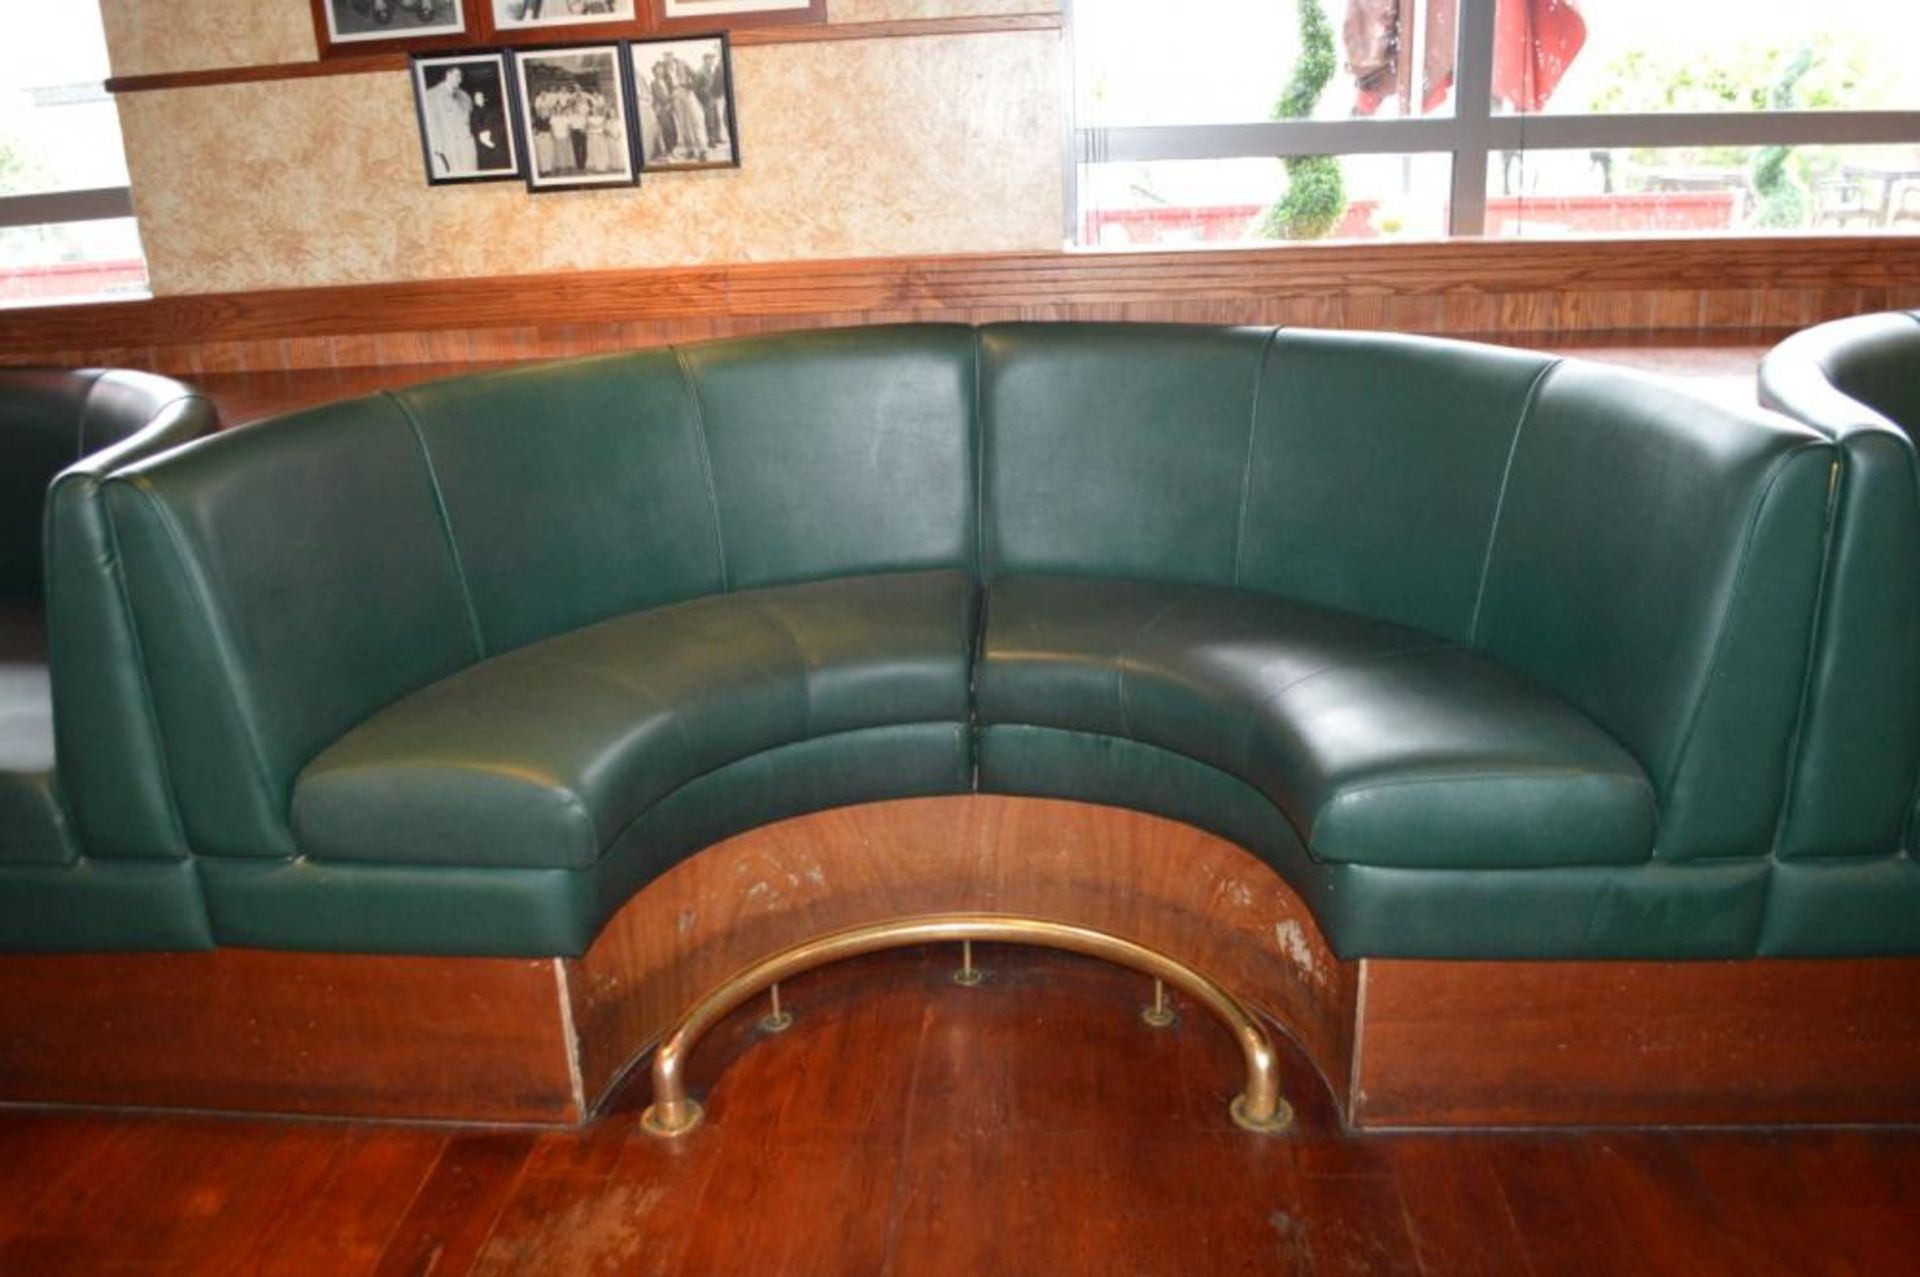 2 x Contemporary U Seating Booths With Green Faux Leather Upholstery and Brass Foot Rests - H105 x W - Image 6 of 6